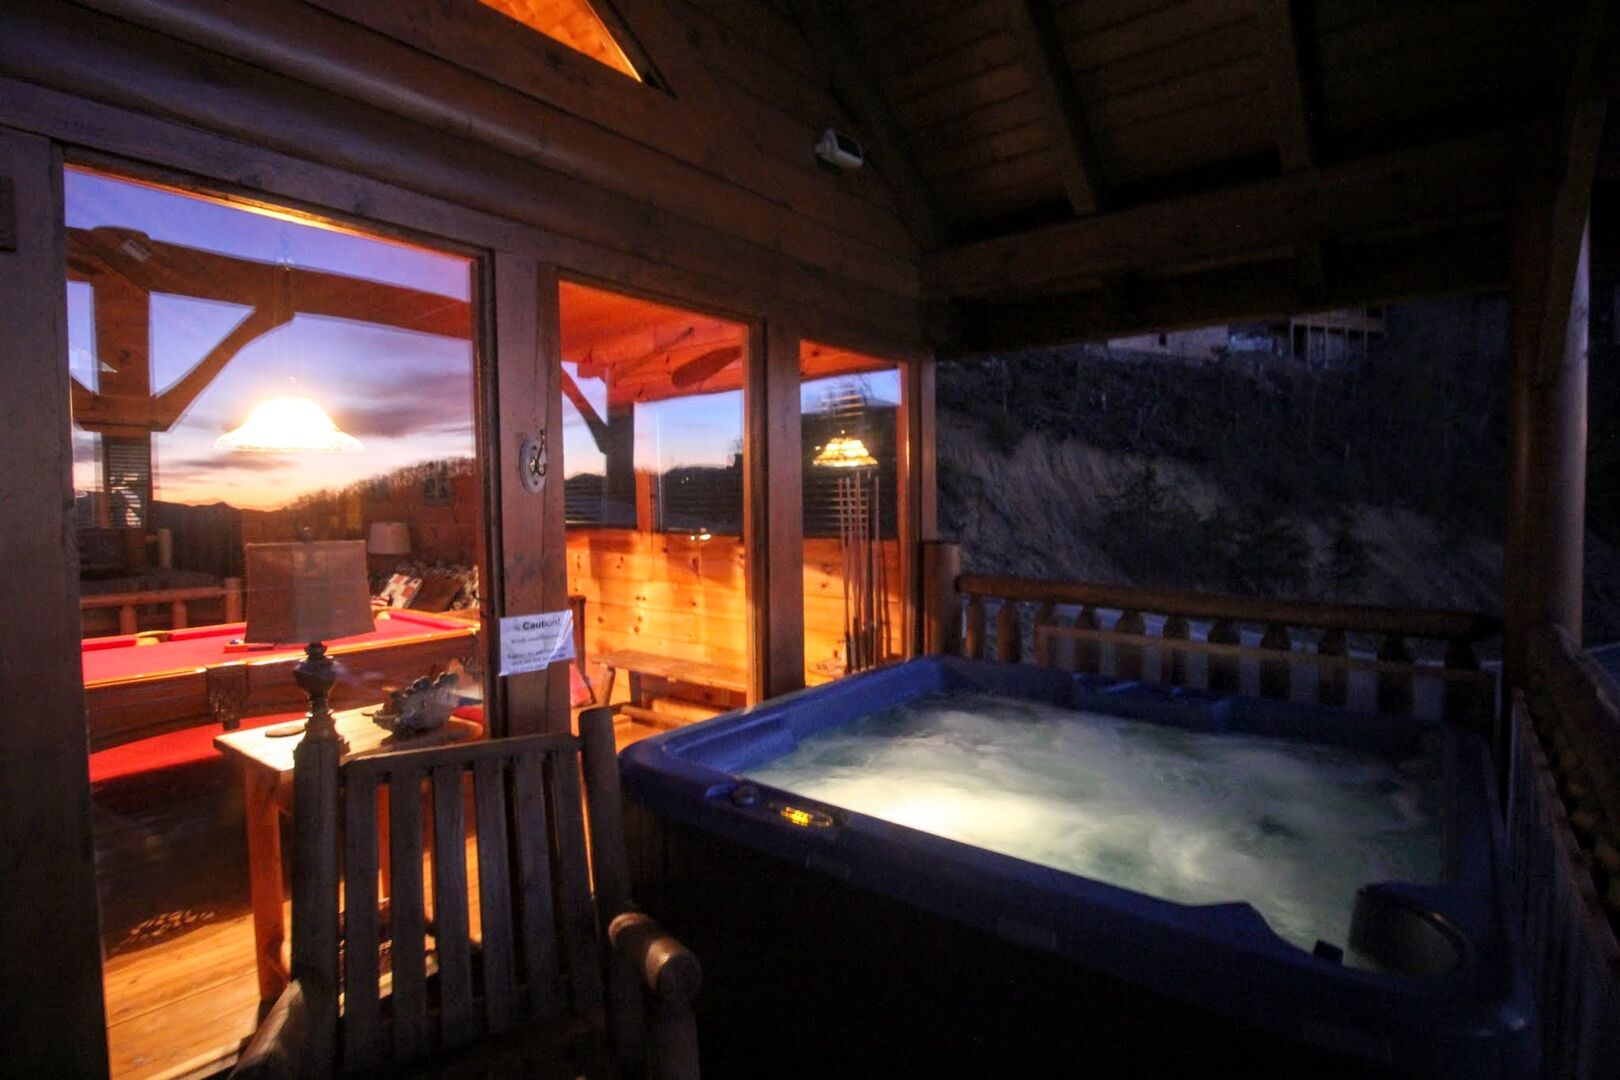 PICTURE YOURSELF SITTING IN THIS WONDERFUL HOT TUB ON THE SECOND DECK, LOOKING AT A GORGEOUS VIEW, WHICH AT SUNSET, REFLECTS INTO THE WINDOWS BEHIND YOU AS IN THE PICTURE!  YOU REALLY CAN'T GET MORE RELAXING THAN THIS!
All photos were taken by Joni - owner